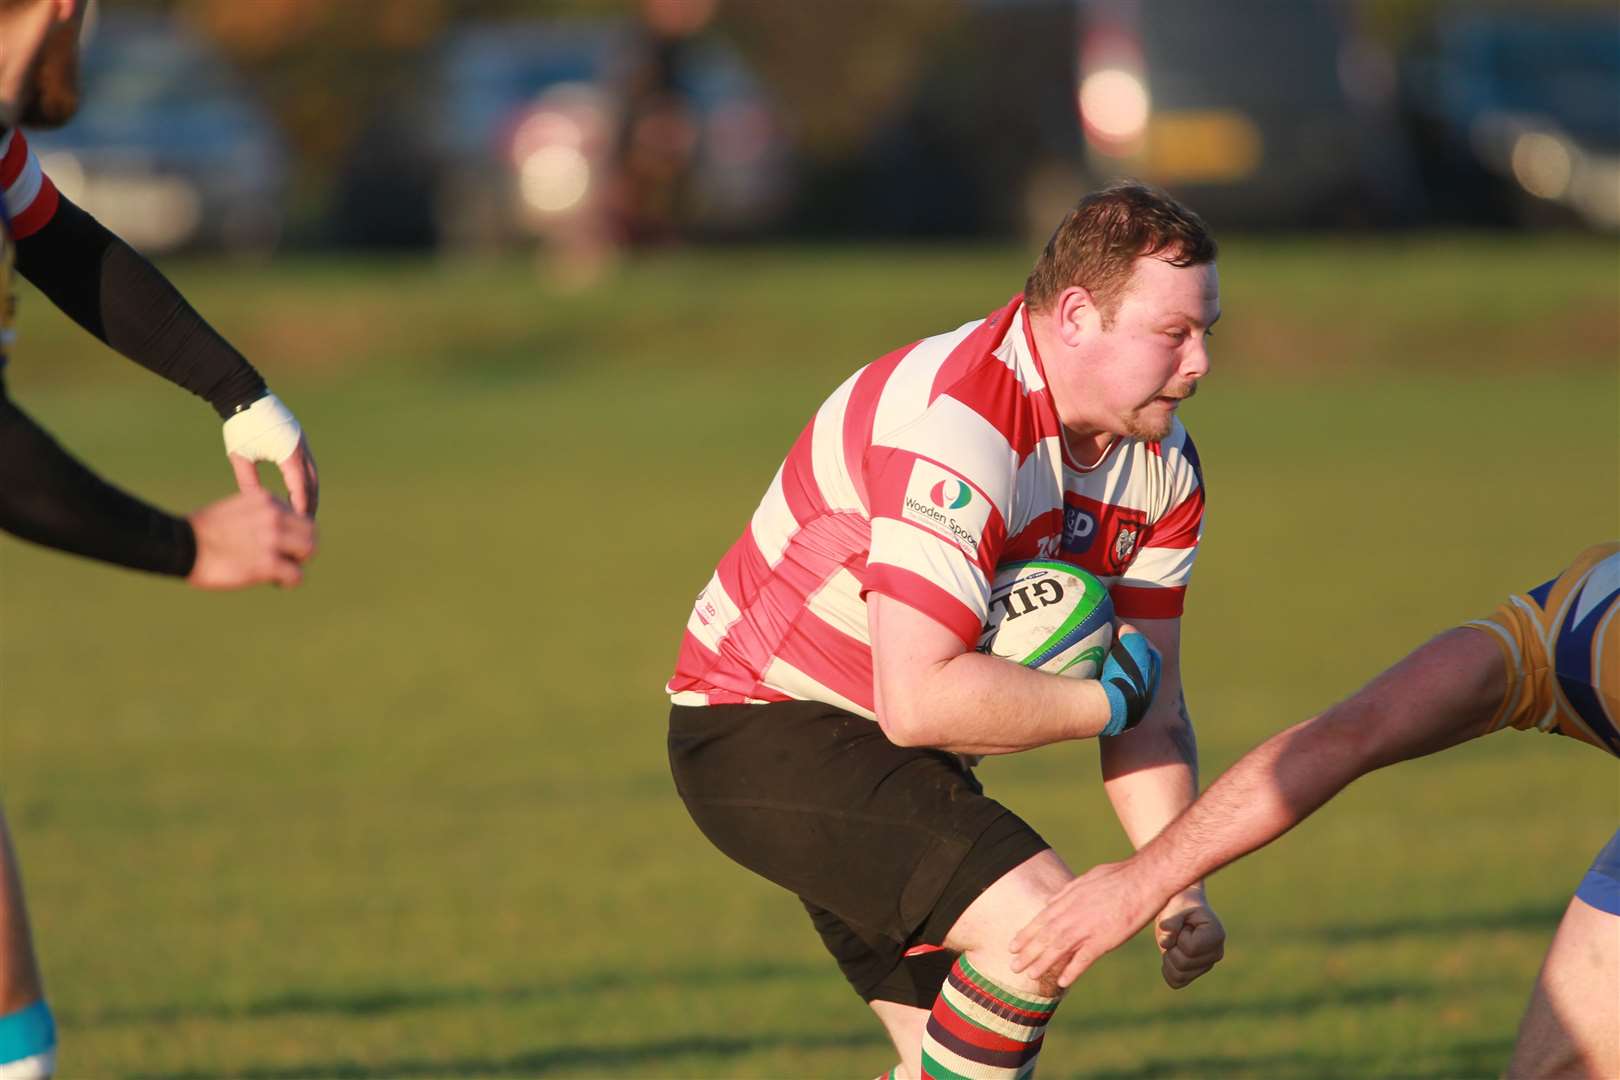 Conner Russon playing rugby for Sheppey in red and white